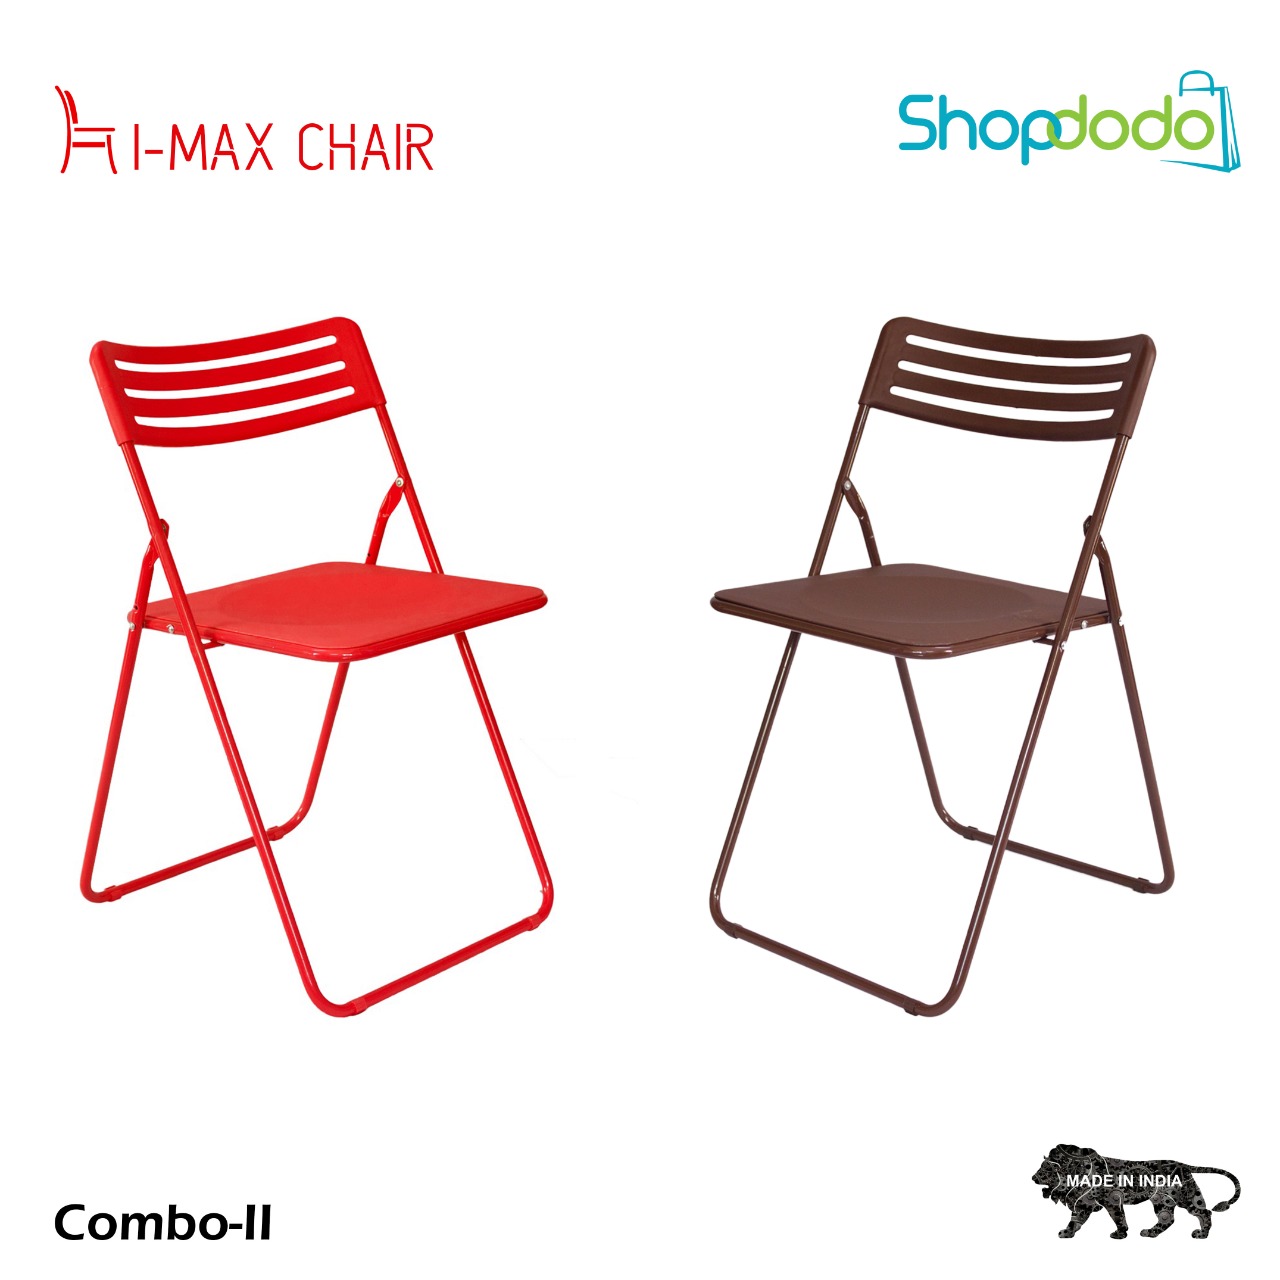 I Max Chair + I Max Chair